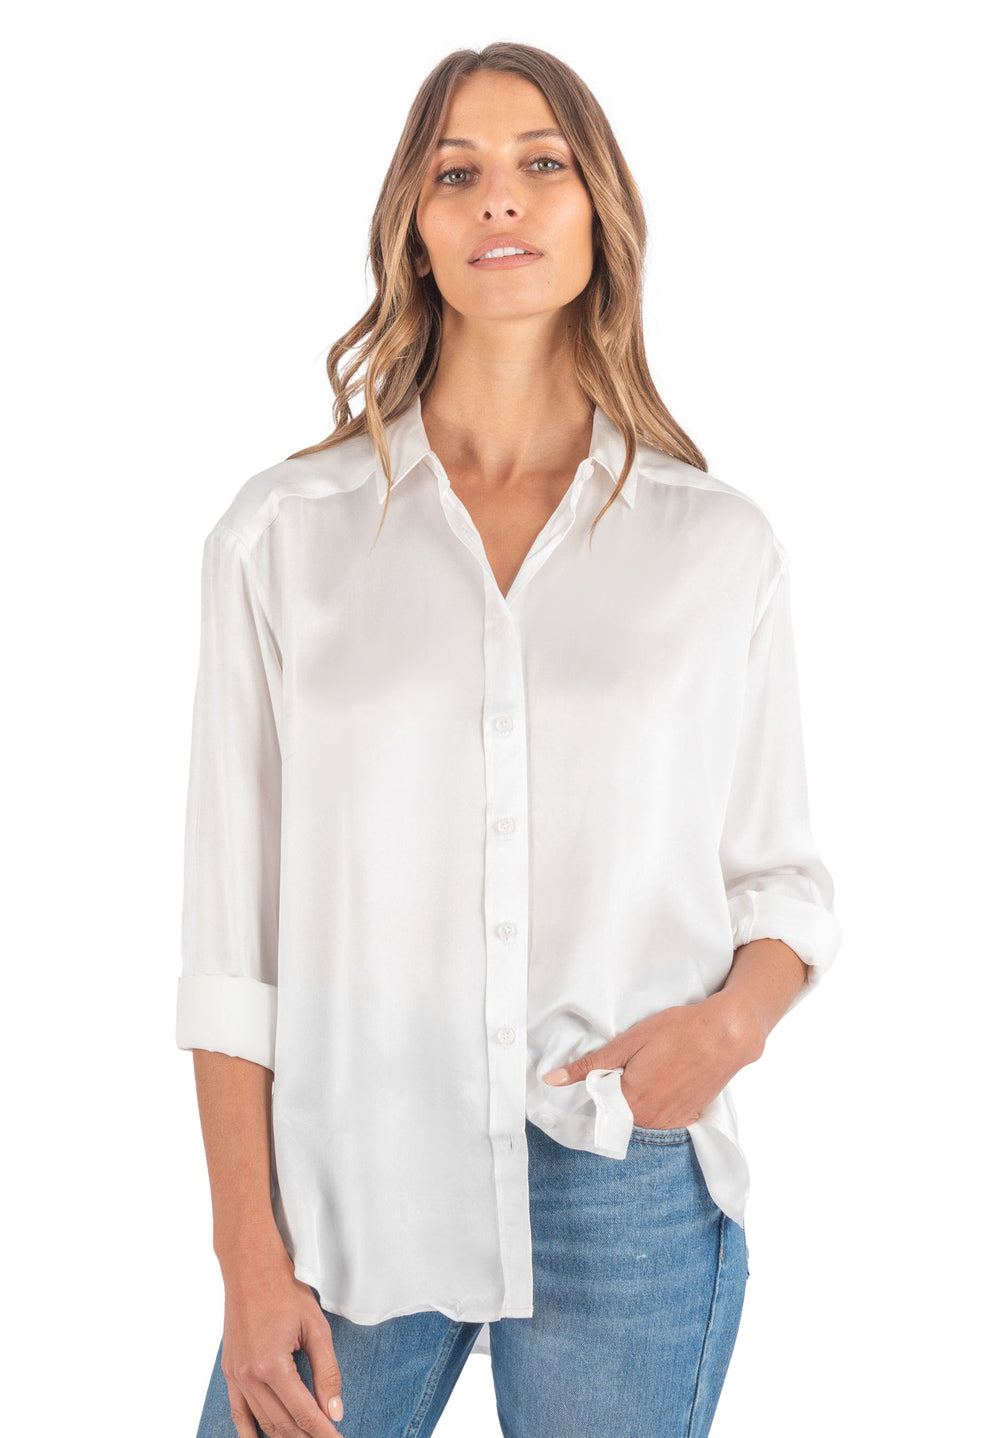 Women's Silk Shirts Tops and Camis –